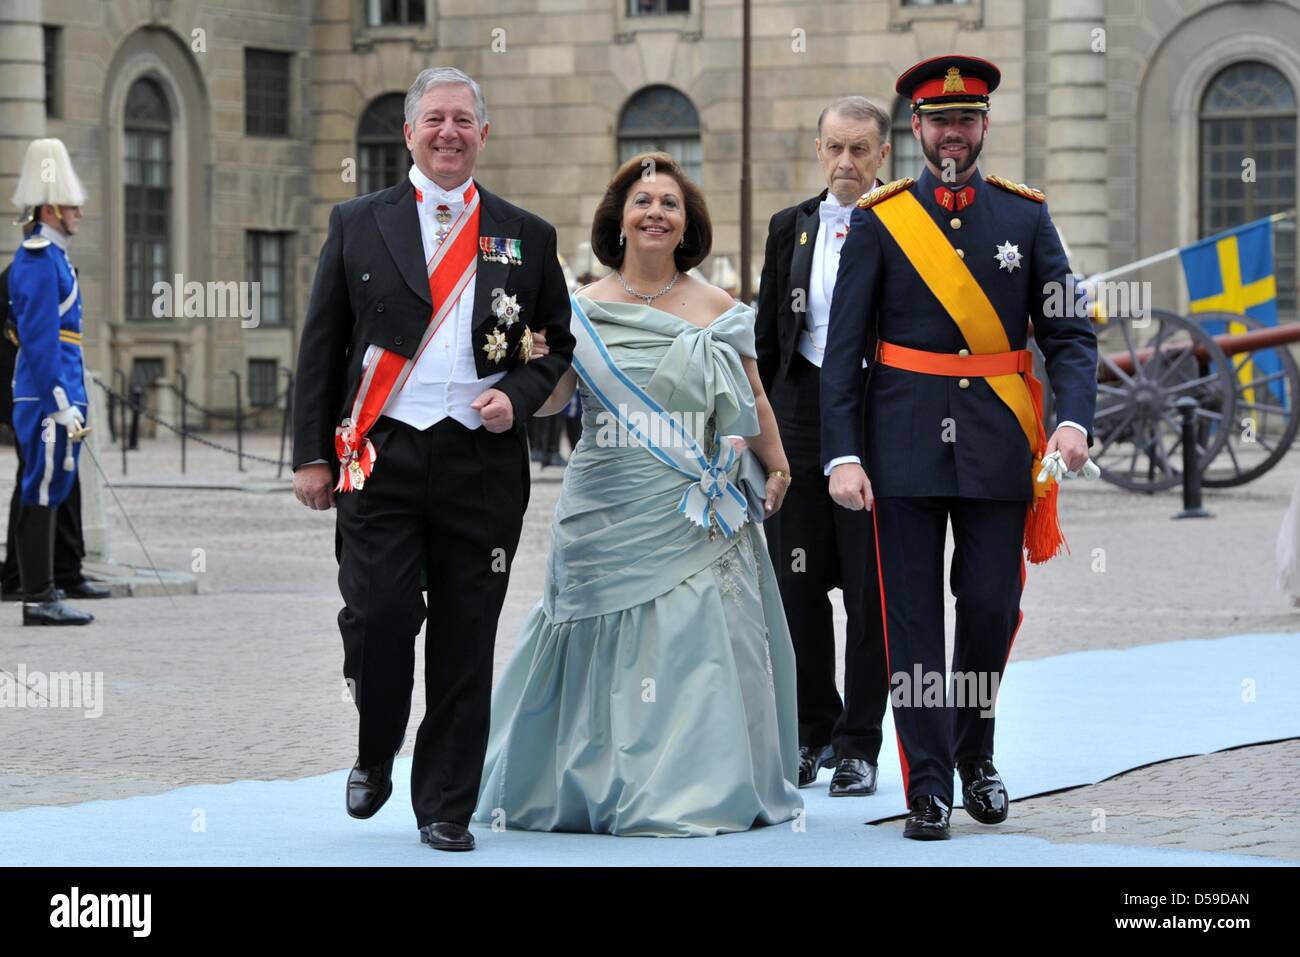 Crown Prince Alexander of Serbia (L), Crown Princess Katherine of Serbia (C) and Guillaume, Hereditary Grand Duke of Luxembourg (R) arrive for the wedding of Crown Princess Victoria of Sweden and Daniel Westling in Stockholm, Sweden, 19 June 2010. Photo: JOCHEN LUEBKE Stock Photo